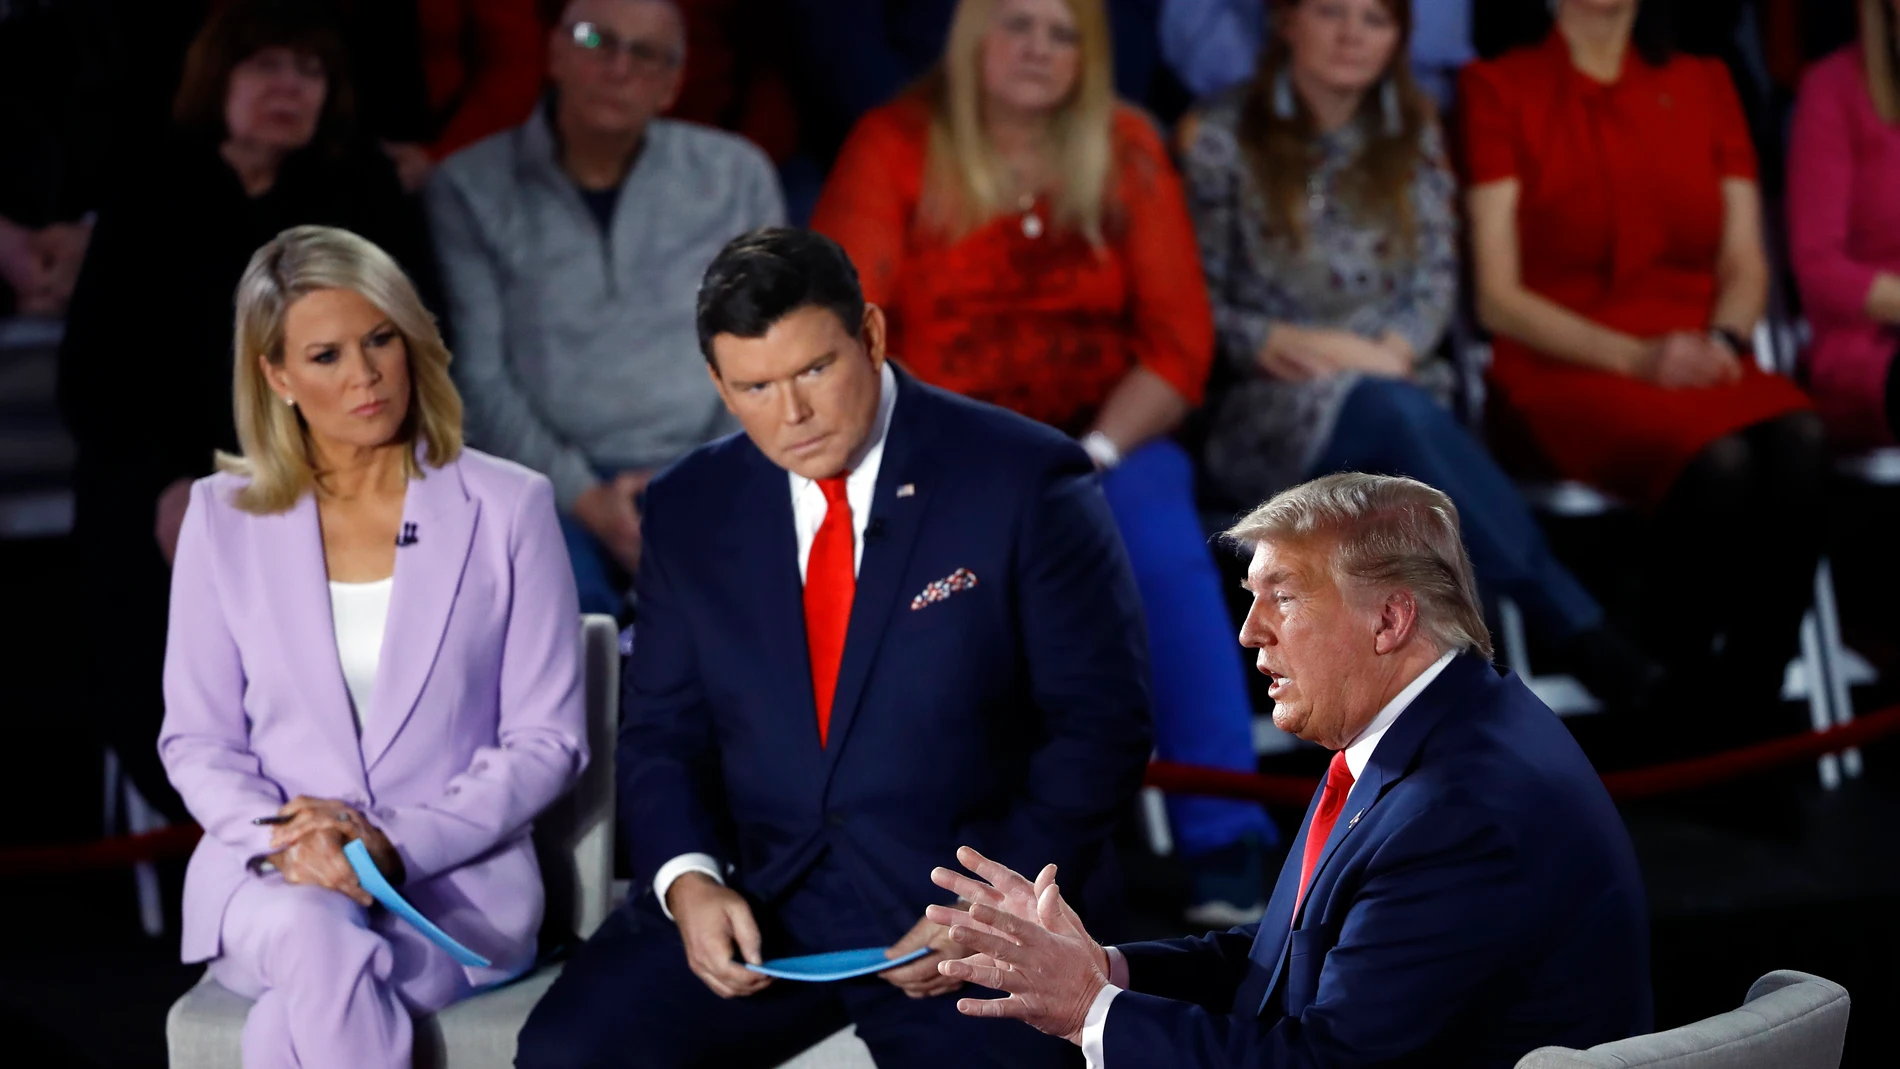 FILE - President Donald Trump speaks during a FOX News Channel Town Hall, co-moderated by FNC's chief political anchor Bret Baier of Special Report and The Story anchor Martha MacCallum, in Scranton, Pa., March 5, 2020. Former President Donald Trump's decision to back out of Fox News' first GOP primary debate this week likely costs the network a chance at a very large audience for the end of summer. Fox debate moderators Bill Baier and Martha MacCallum says Trump's exit will give other candid...